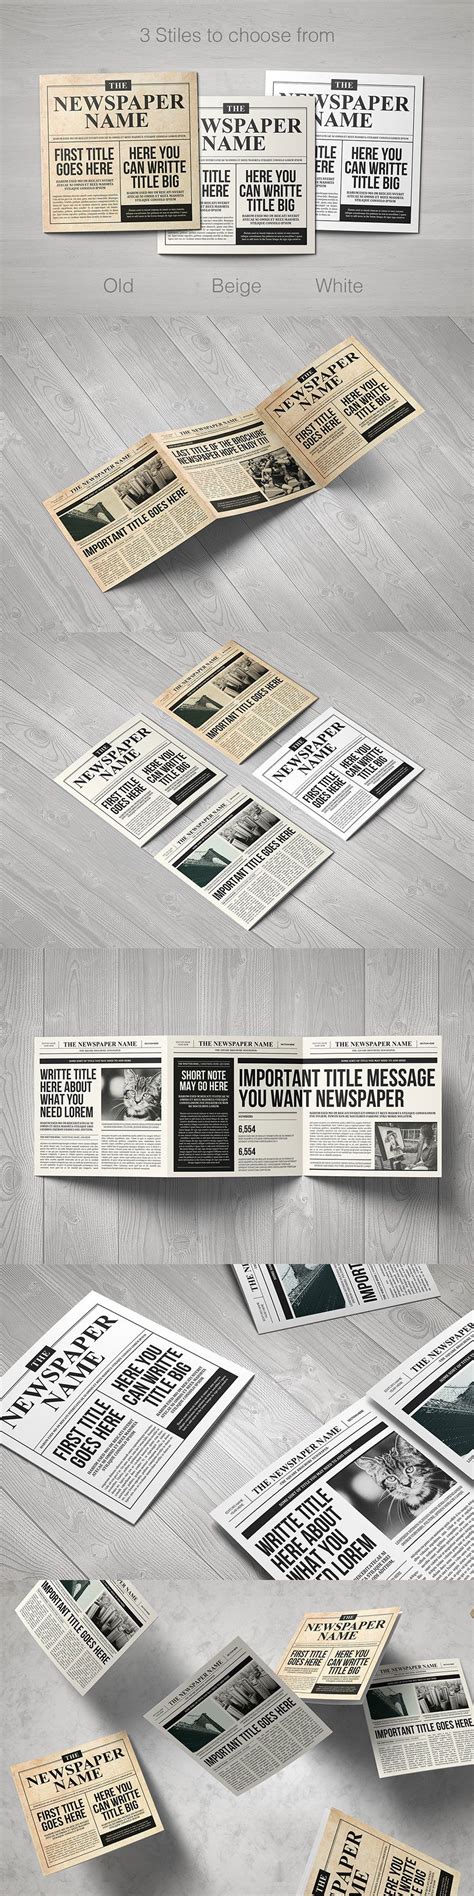 Newspaper Brochure Trifold In 2020 Trifold Brochure Trifold Brochure